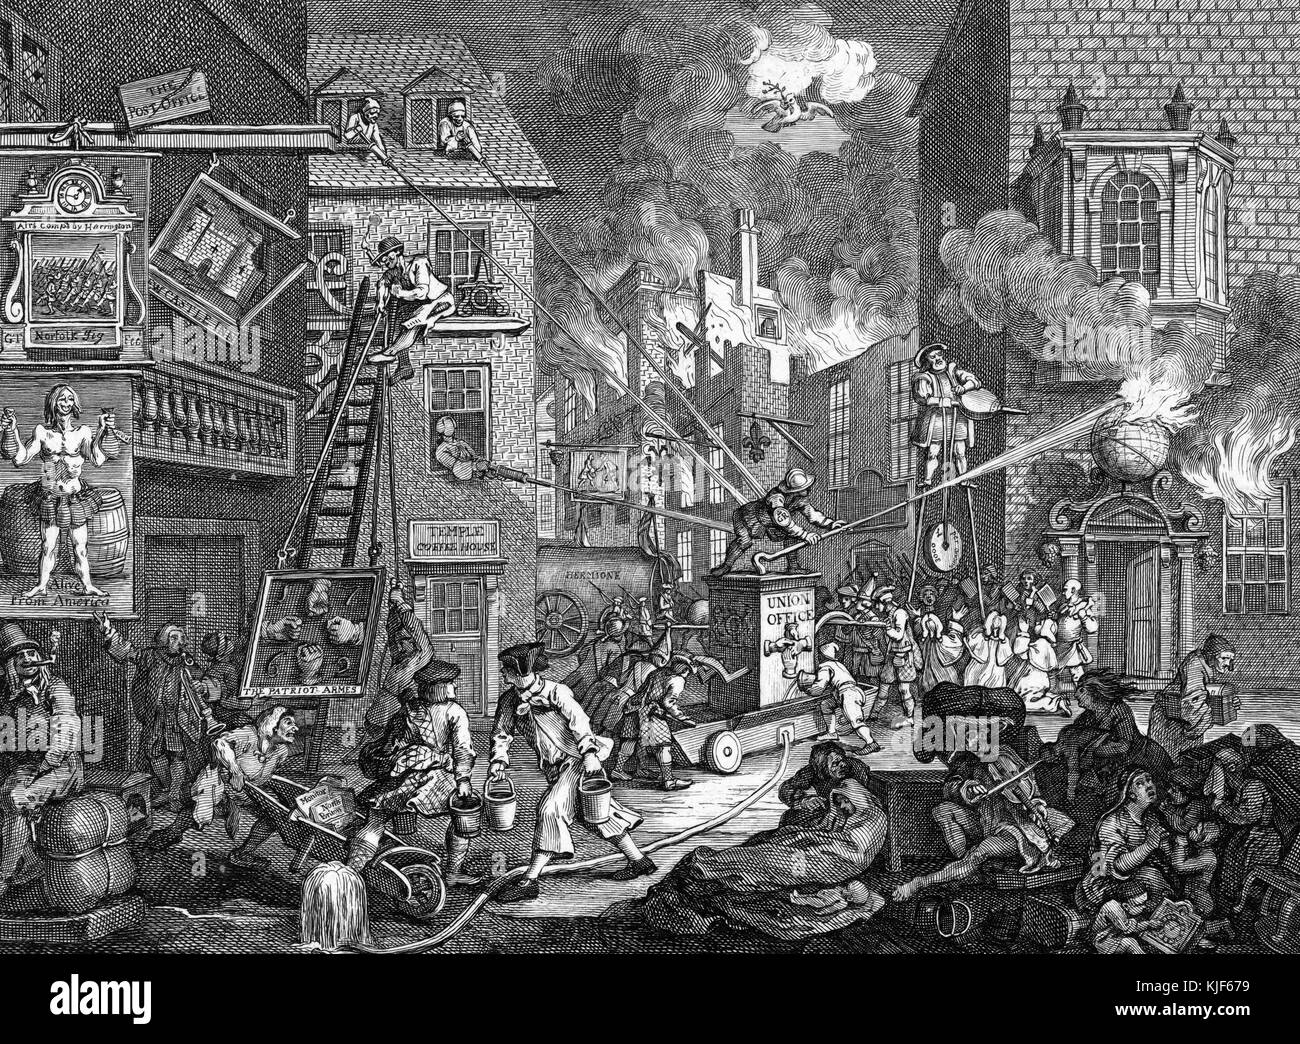 Engraving on paper, titled 'The Times, Plate 1', depicting a fire in the background buildings, a fire engine occupies the center of the scene, above the engine flies a dove of peace, in the foreground to the right are the refugees who have fled the European war, a man plays his fiddle, a Dutch merchant happily smokes his pipe to the lower left corner, by William Hogarth, 1762. From the New York Public Library. Stock Photo